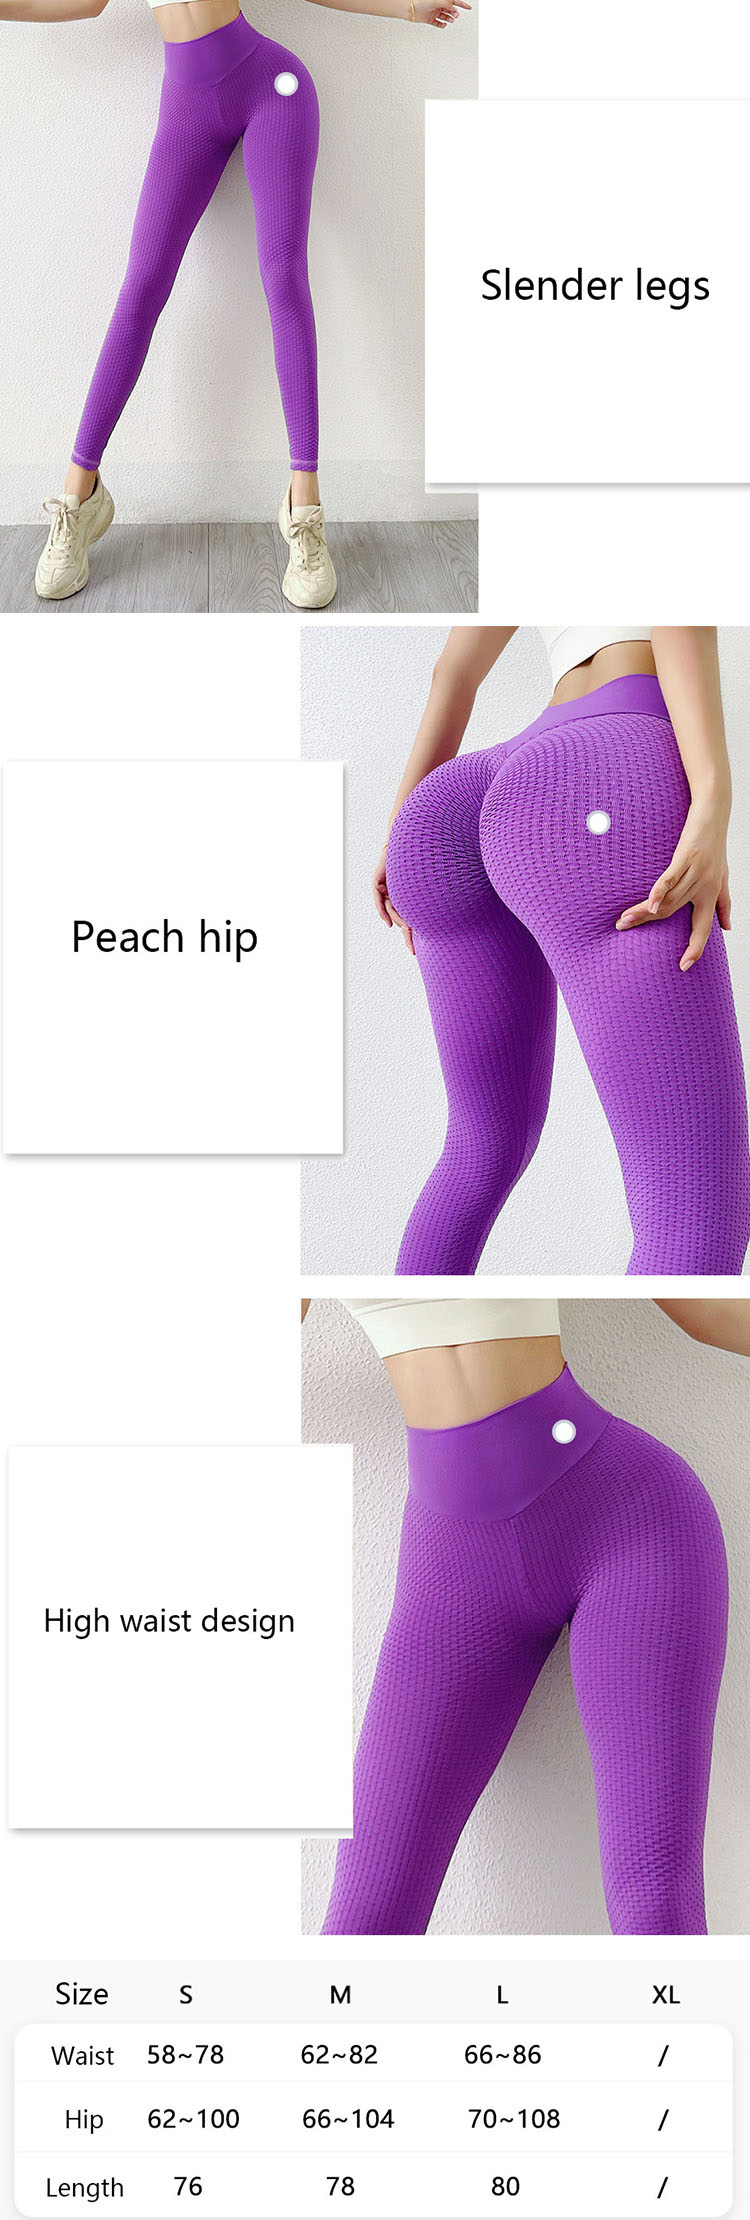 The high-waisted body design is an important process design for the ribbed yoga pants.